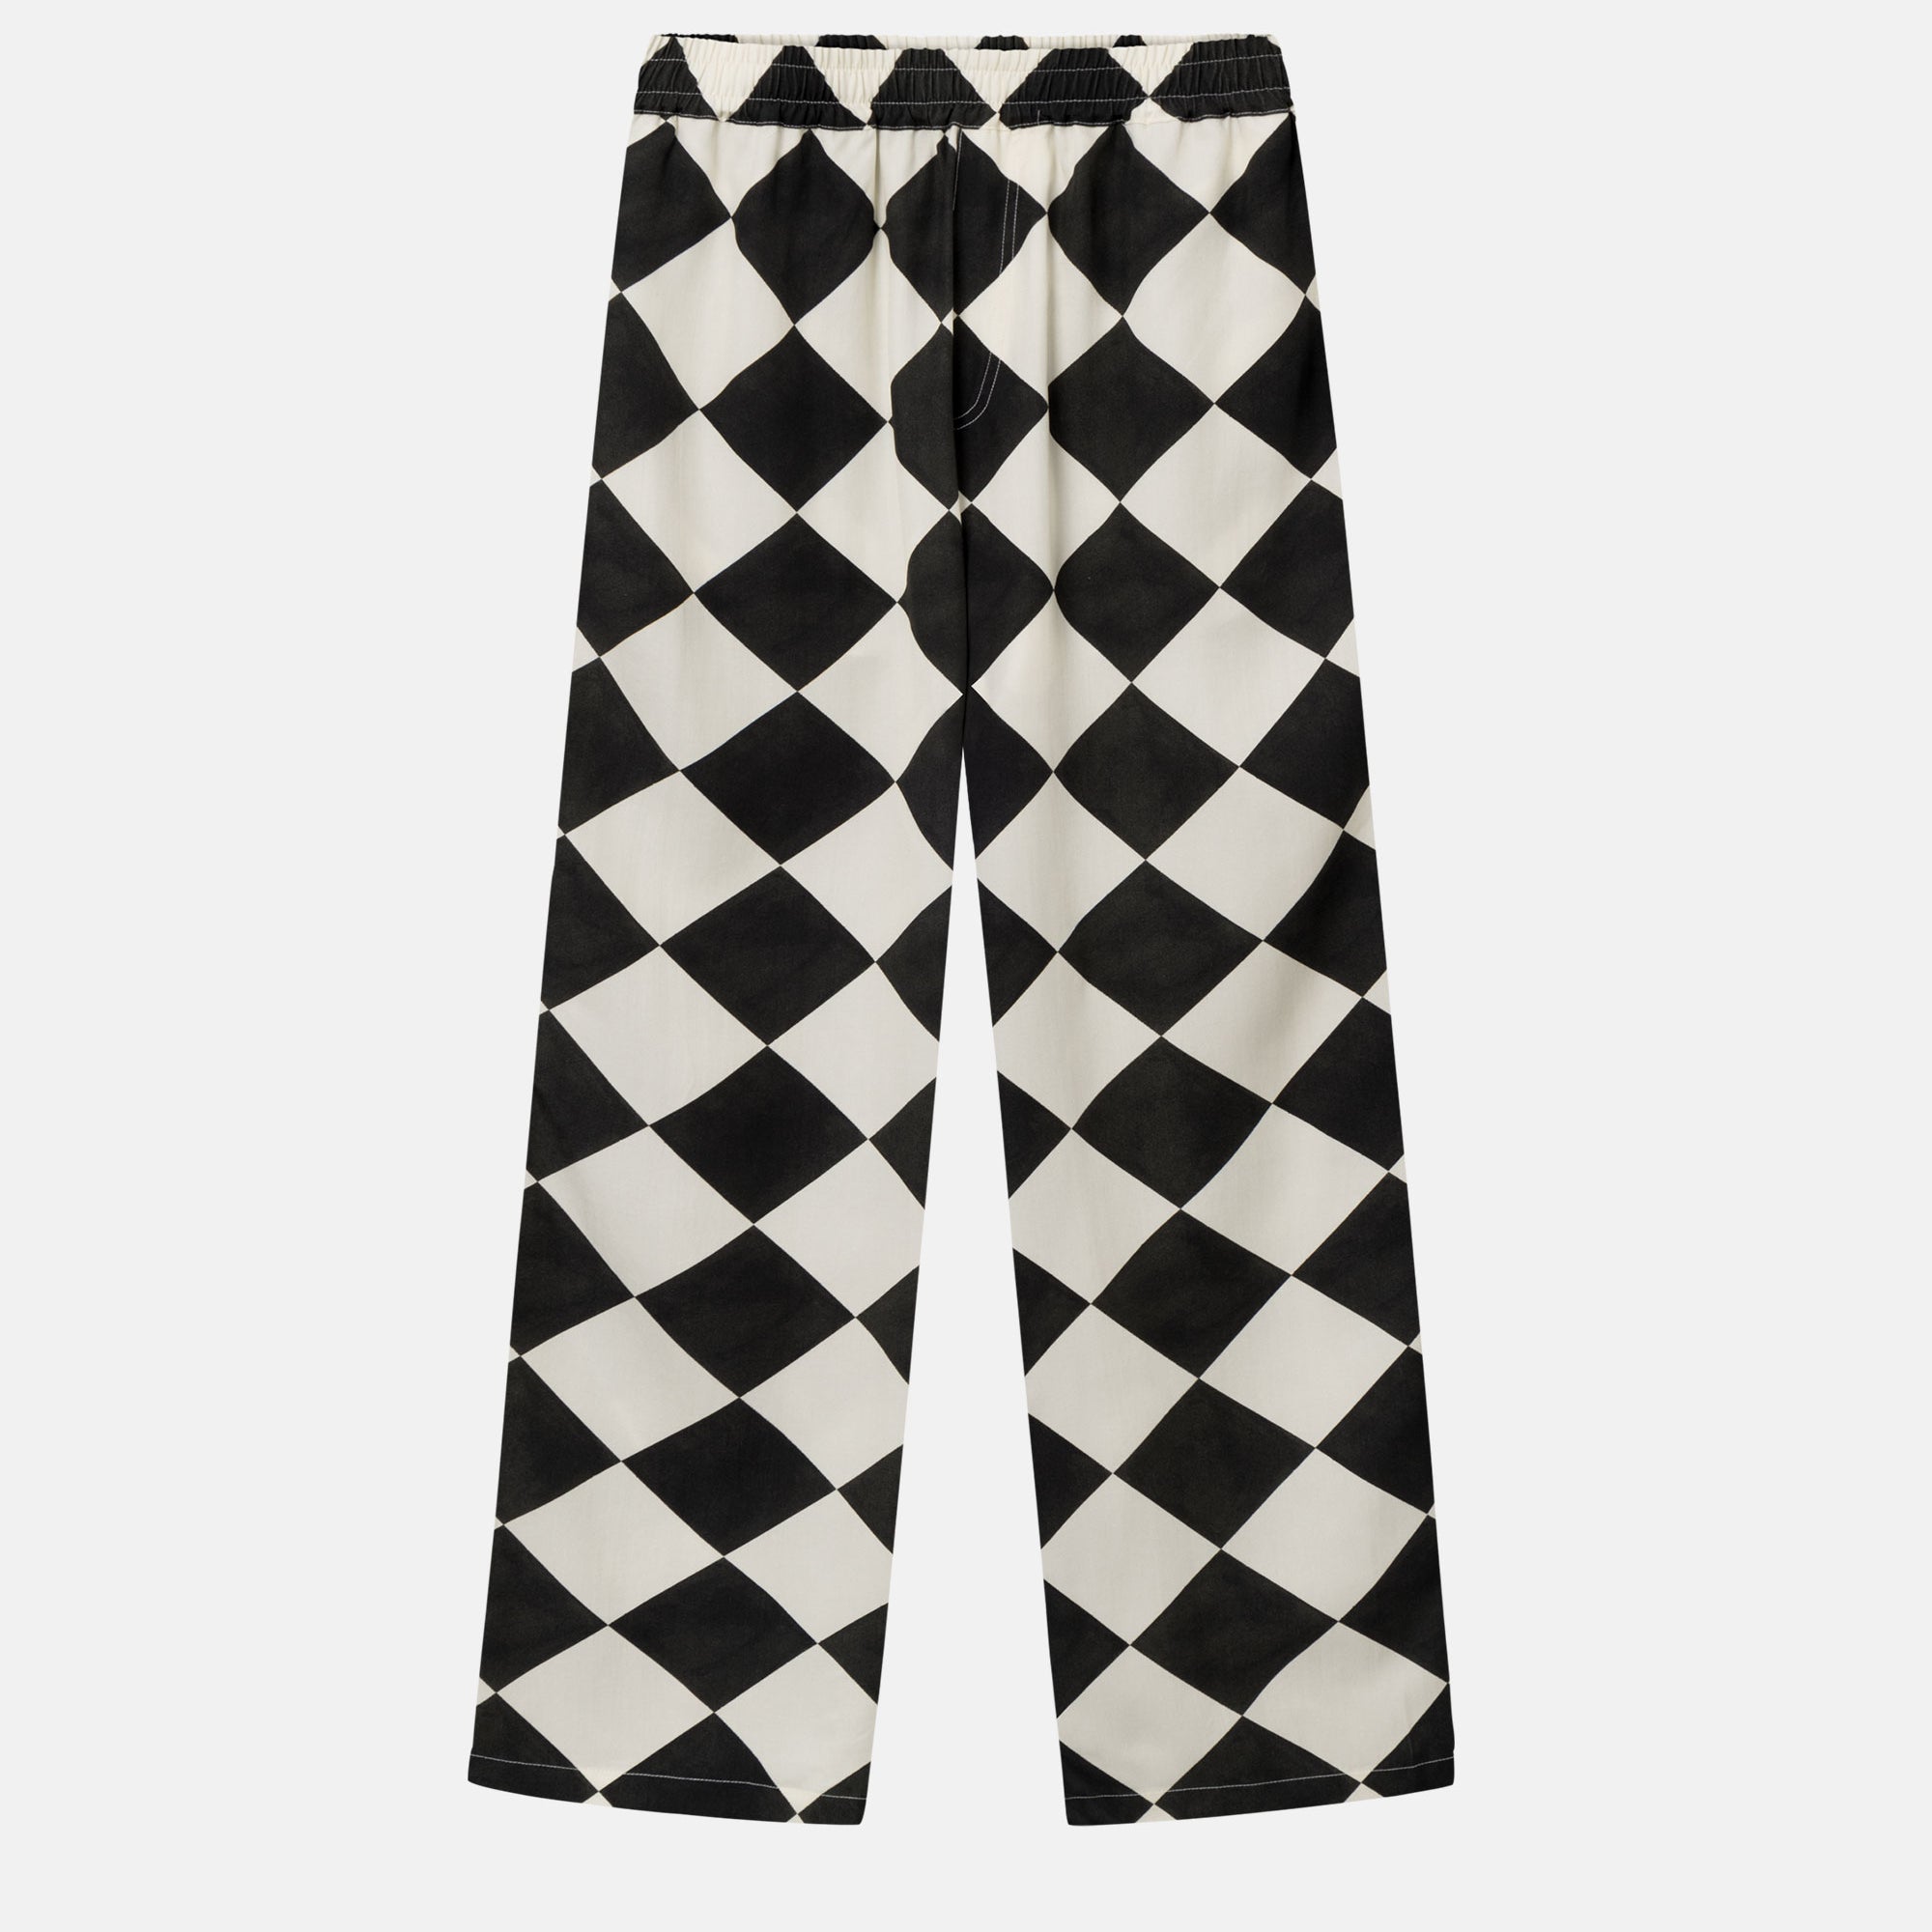 Vacation pants with a black and white checkered pattern, two front pockets, and drawstrings.